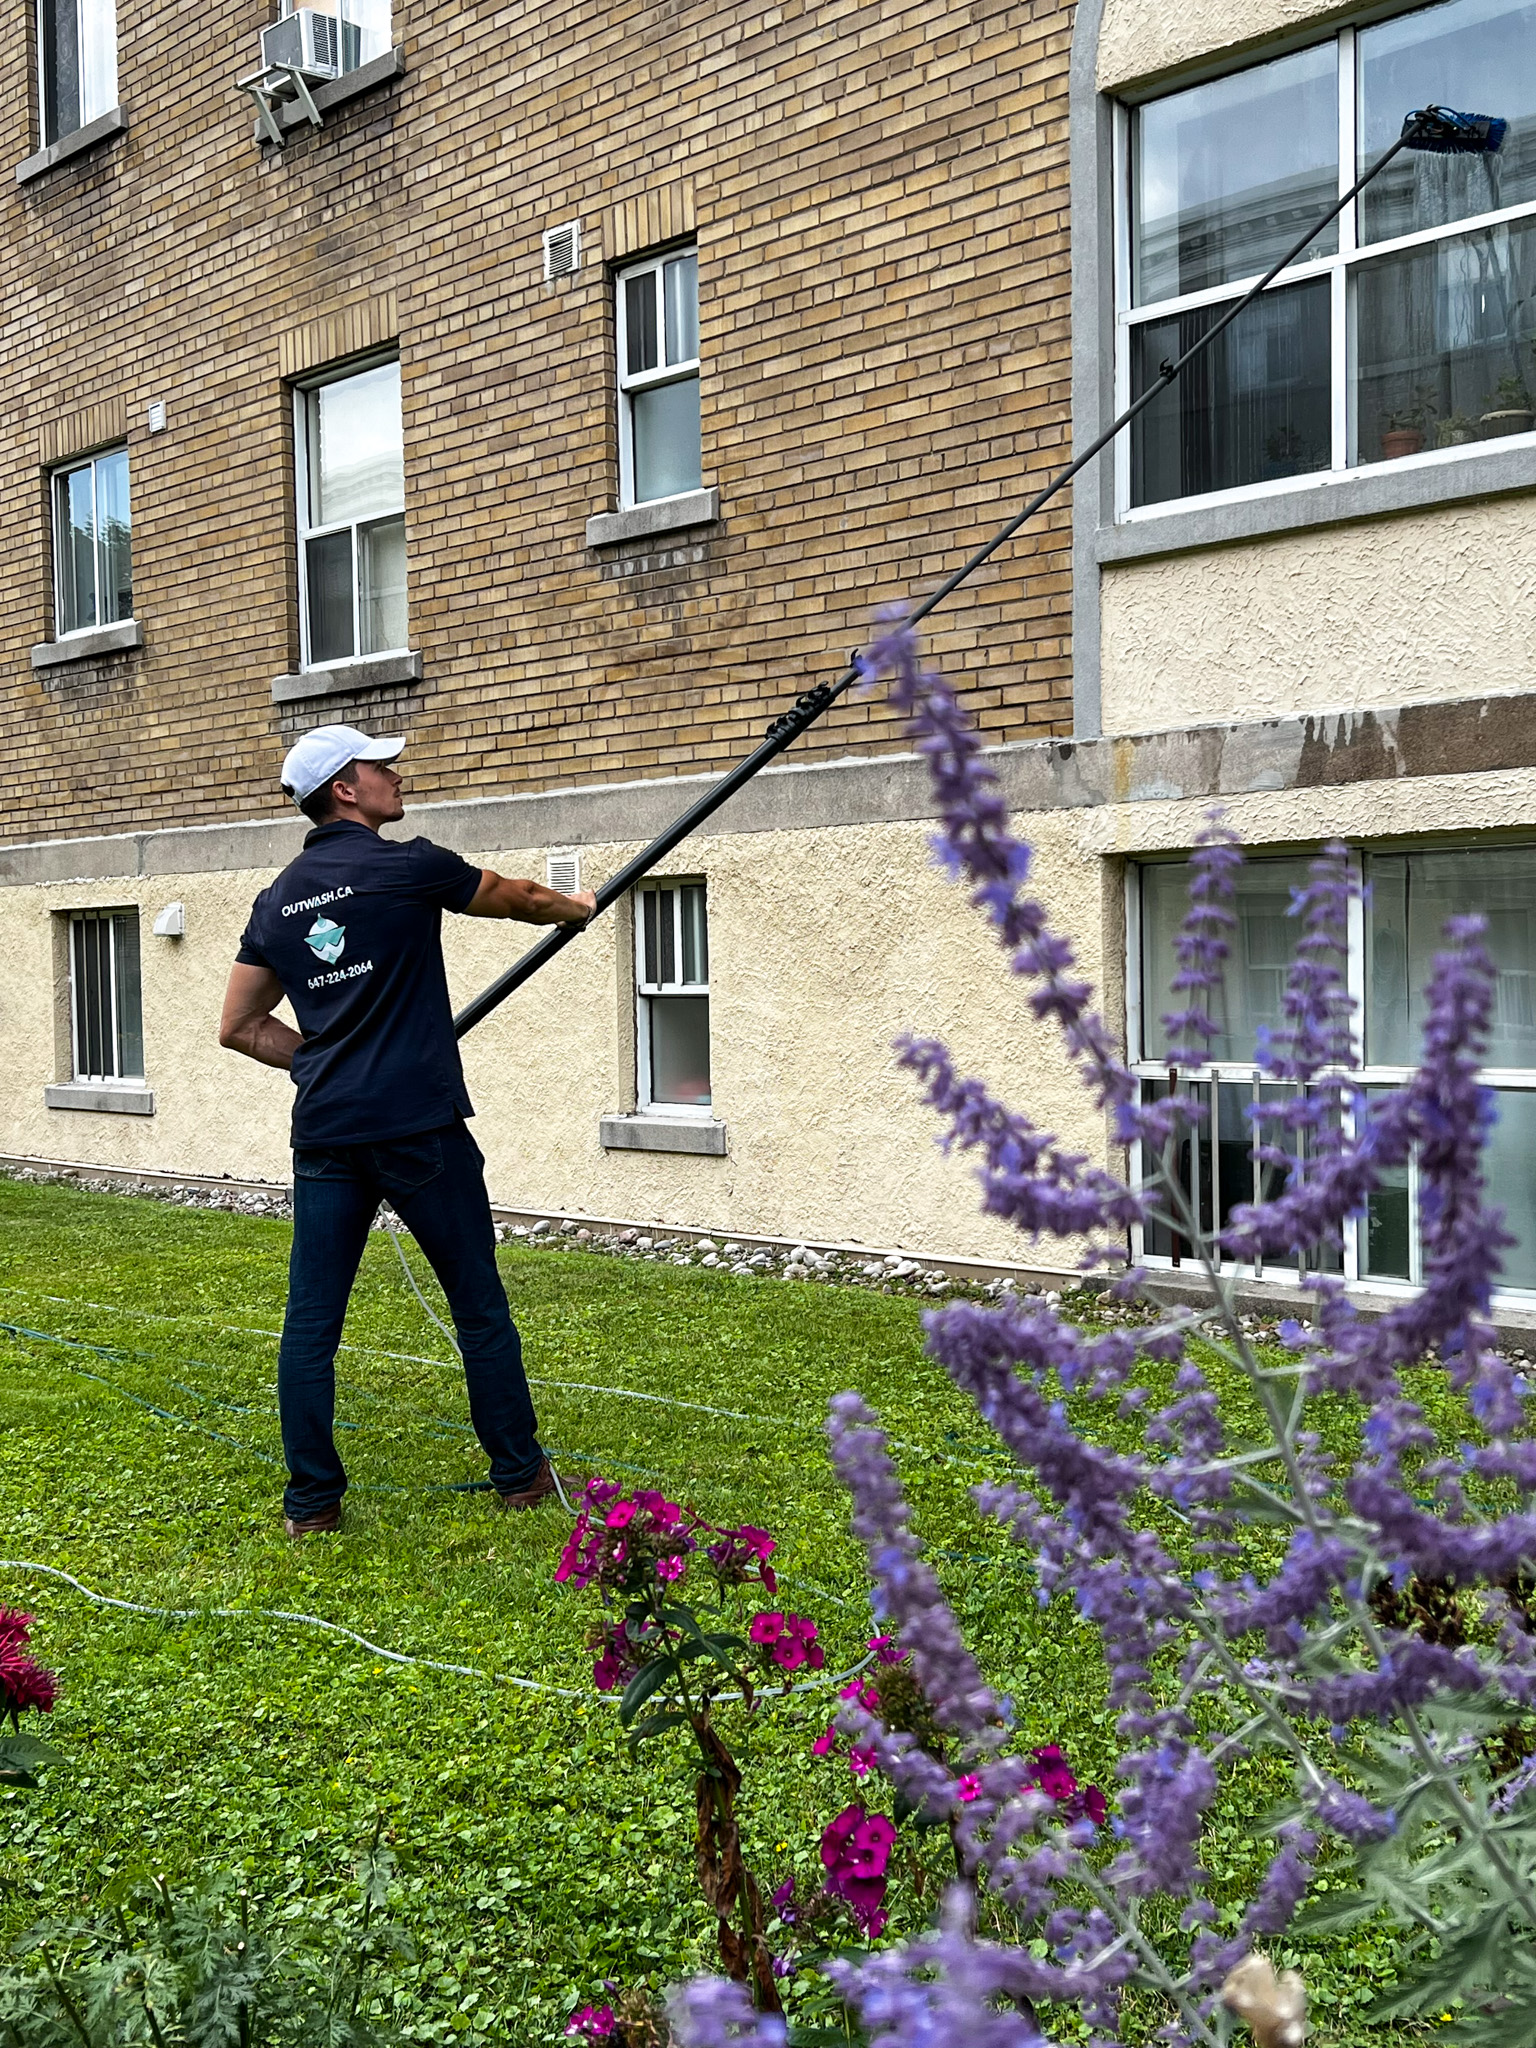 Professional window cleaner using a Water Fed Pole connected to a 4-stage water purification system to clean the windows of a multi-story building, with vibrant flowers in the foreground.